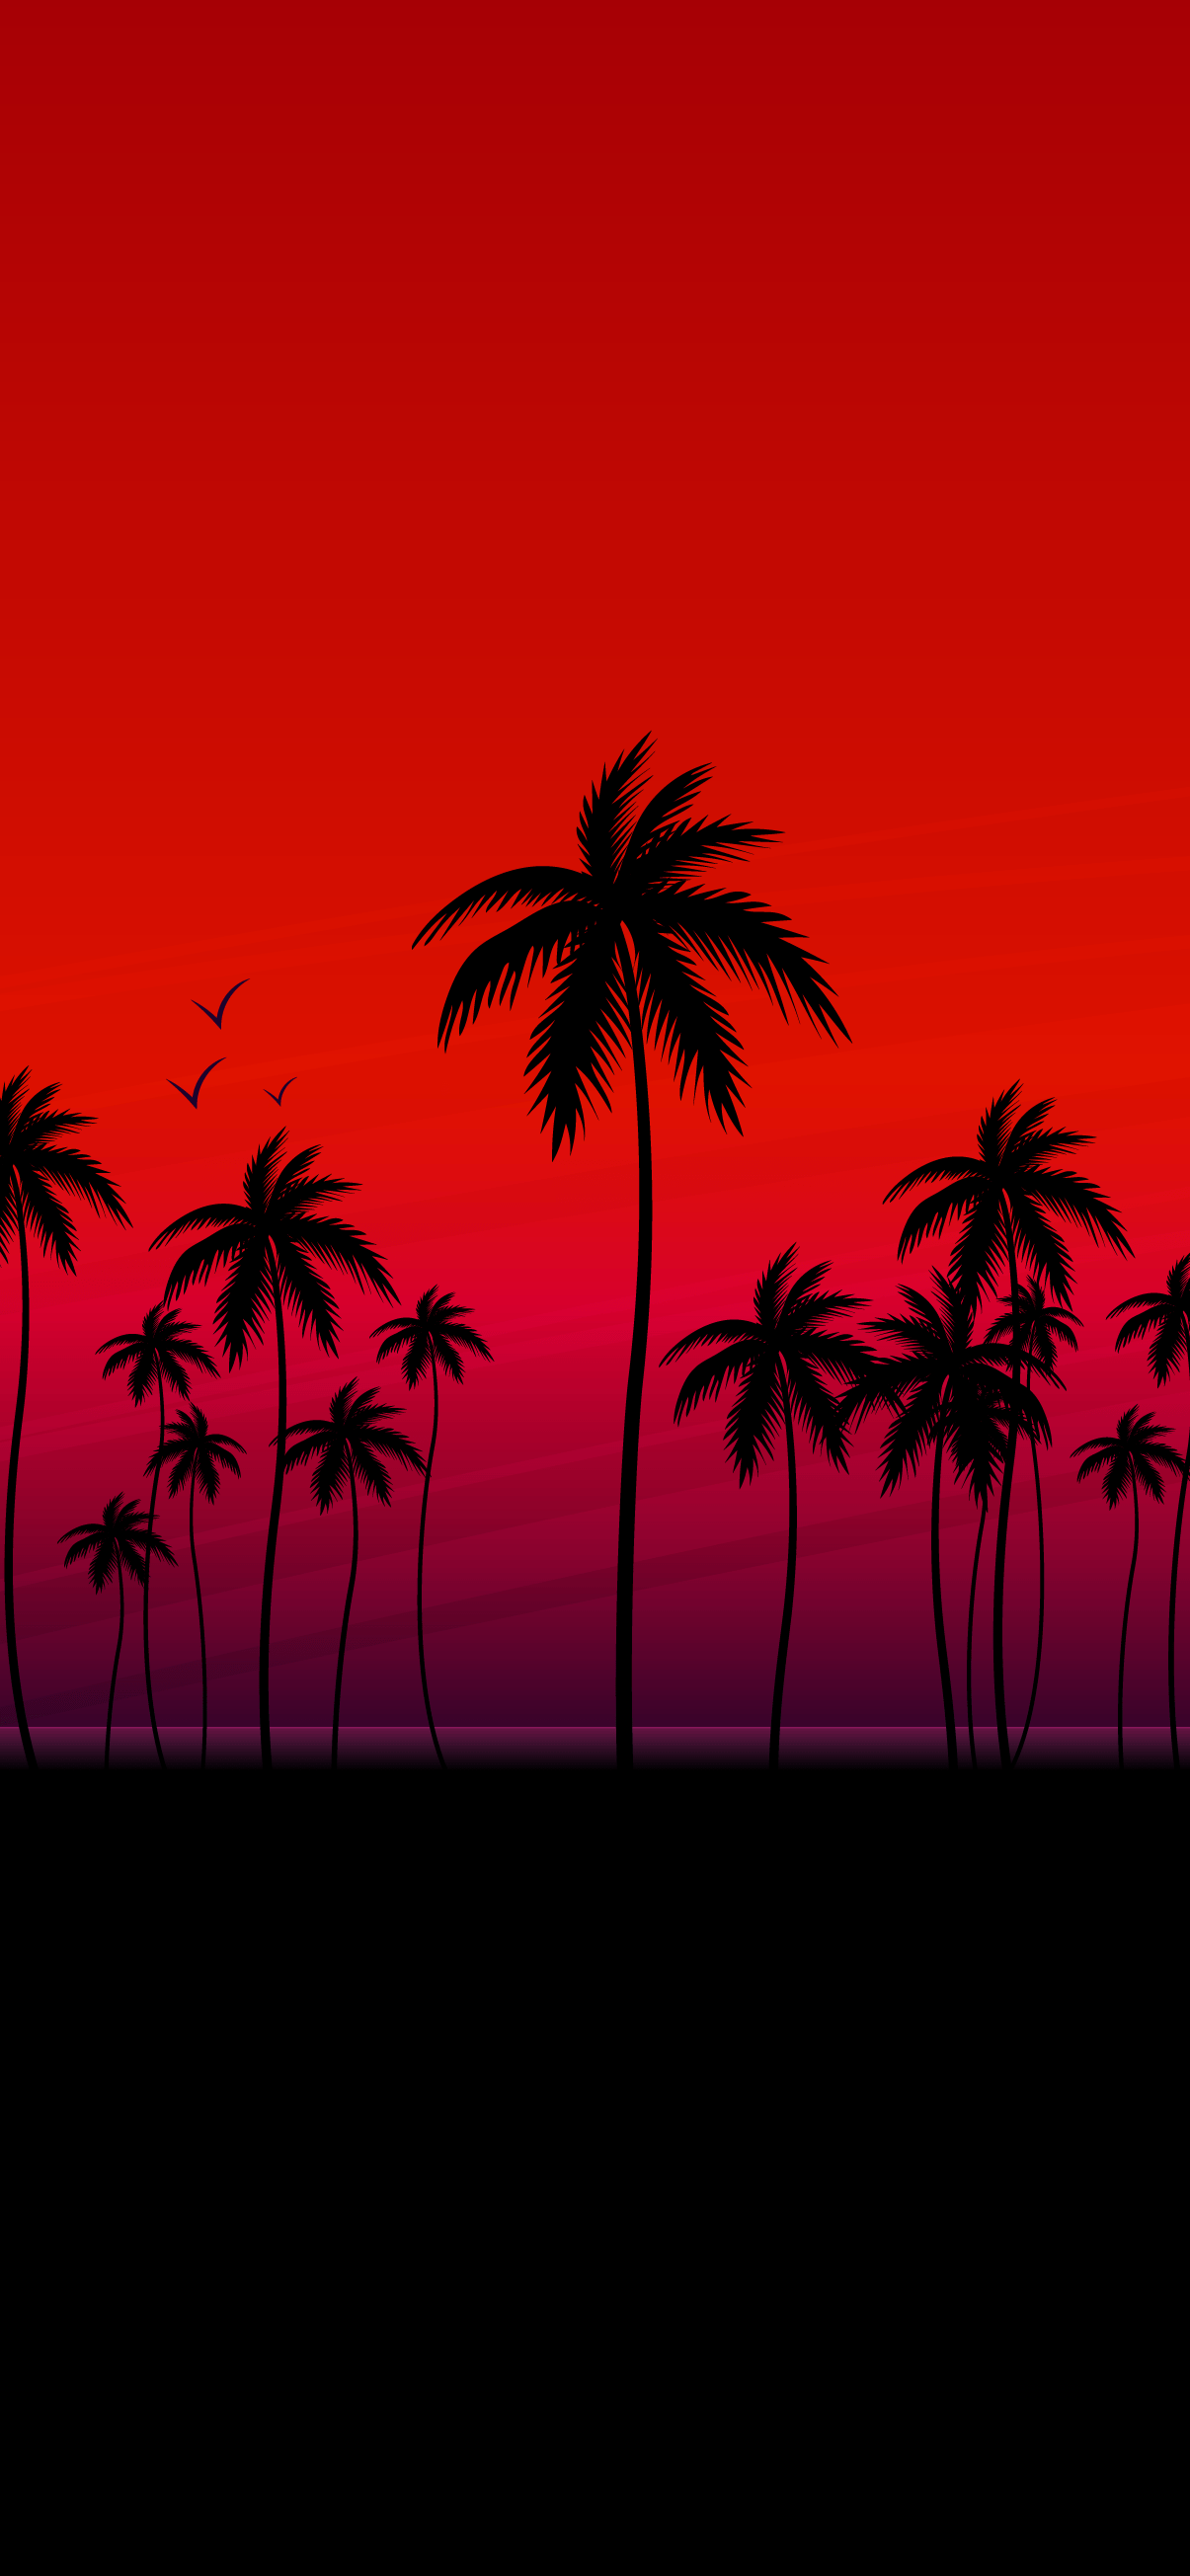 A sunset with palm trees and birds - Red, coconut, California, HD